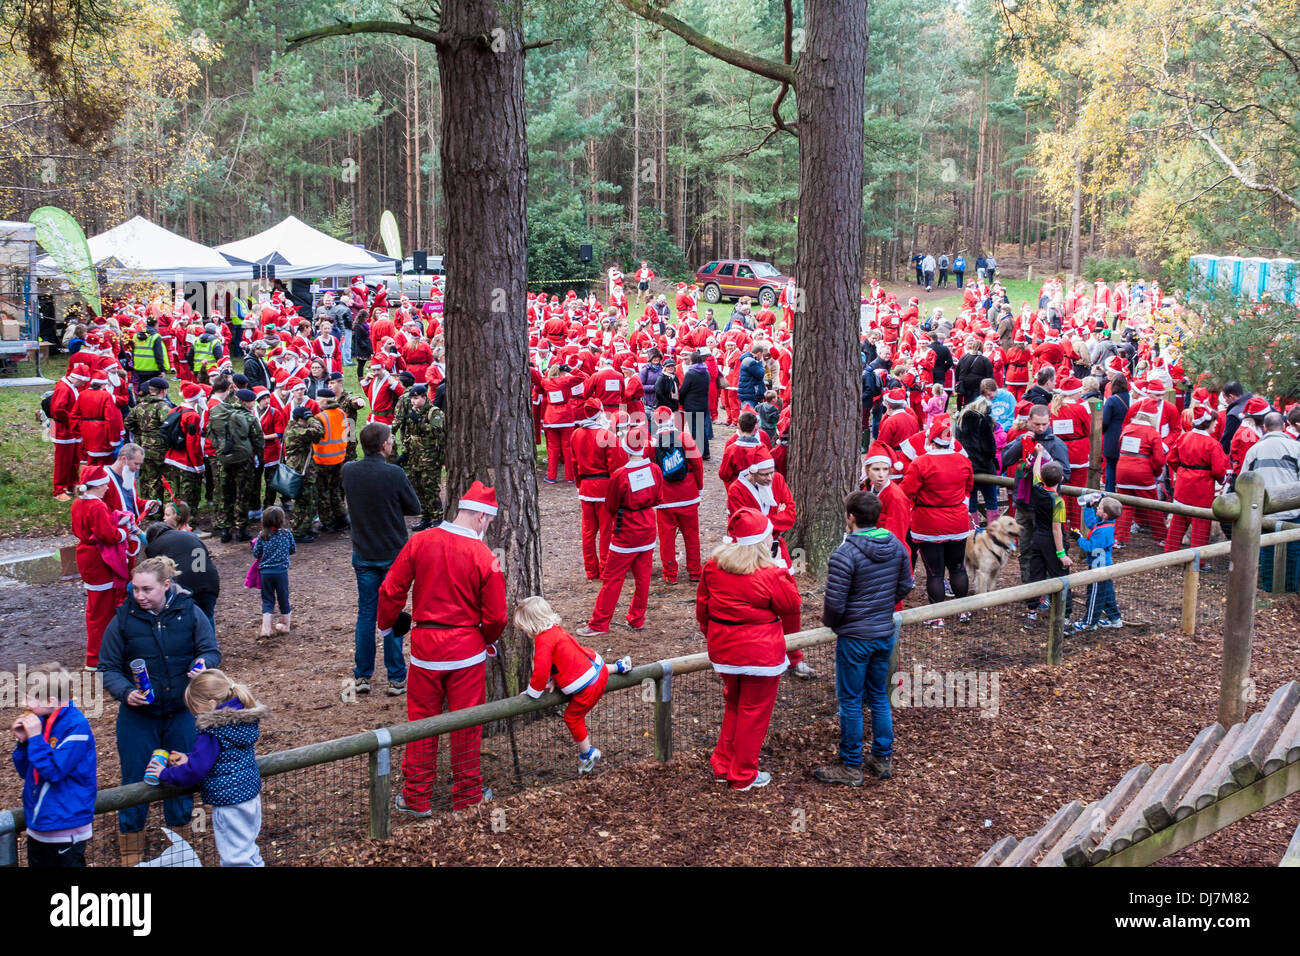 Hundreds of fund-raisers dressed as Santas run in the annual 'Santa Dash' to raise money for the Thames Hospice charity. Swinley Forest, Bracknell, Berkshire, England, GB, UK Stock Photo